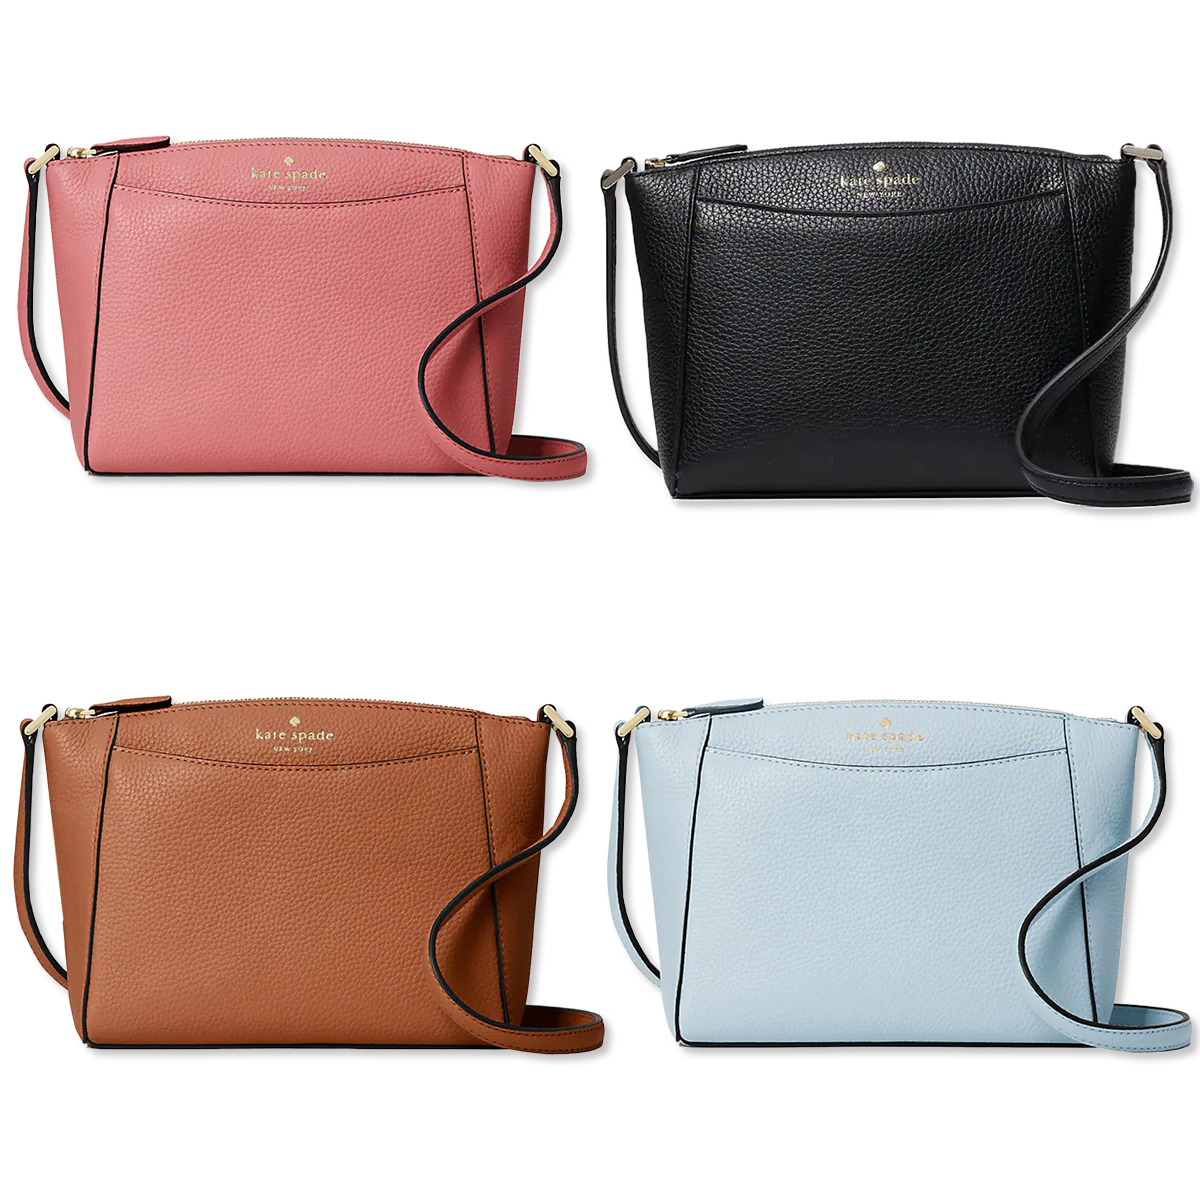 Kate Spade 24-Hour Flash Deal: Get a $300 Crossbody Bag for Just $89